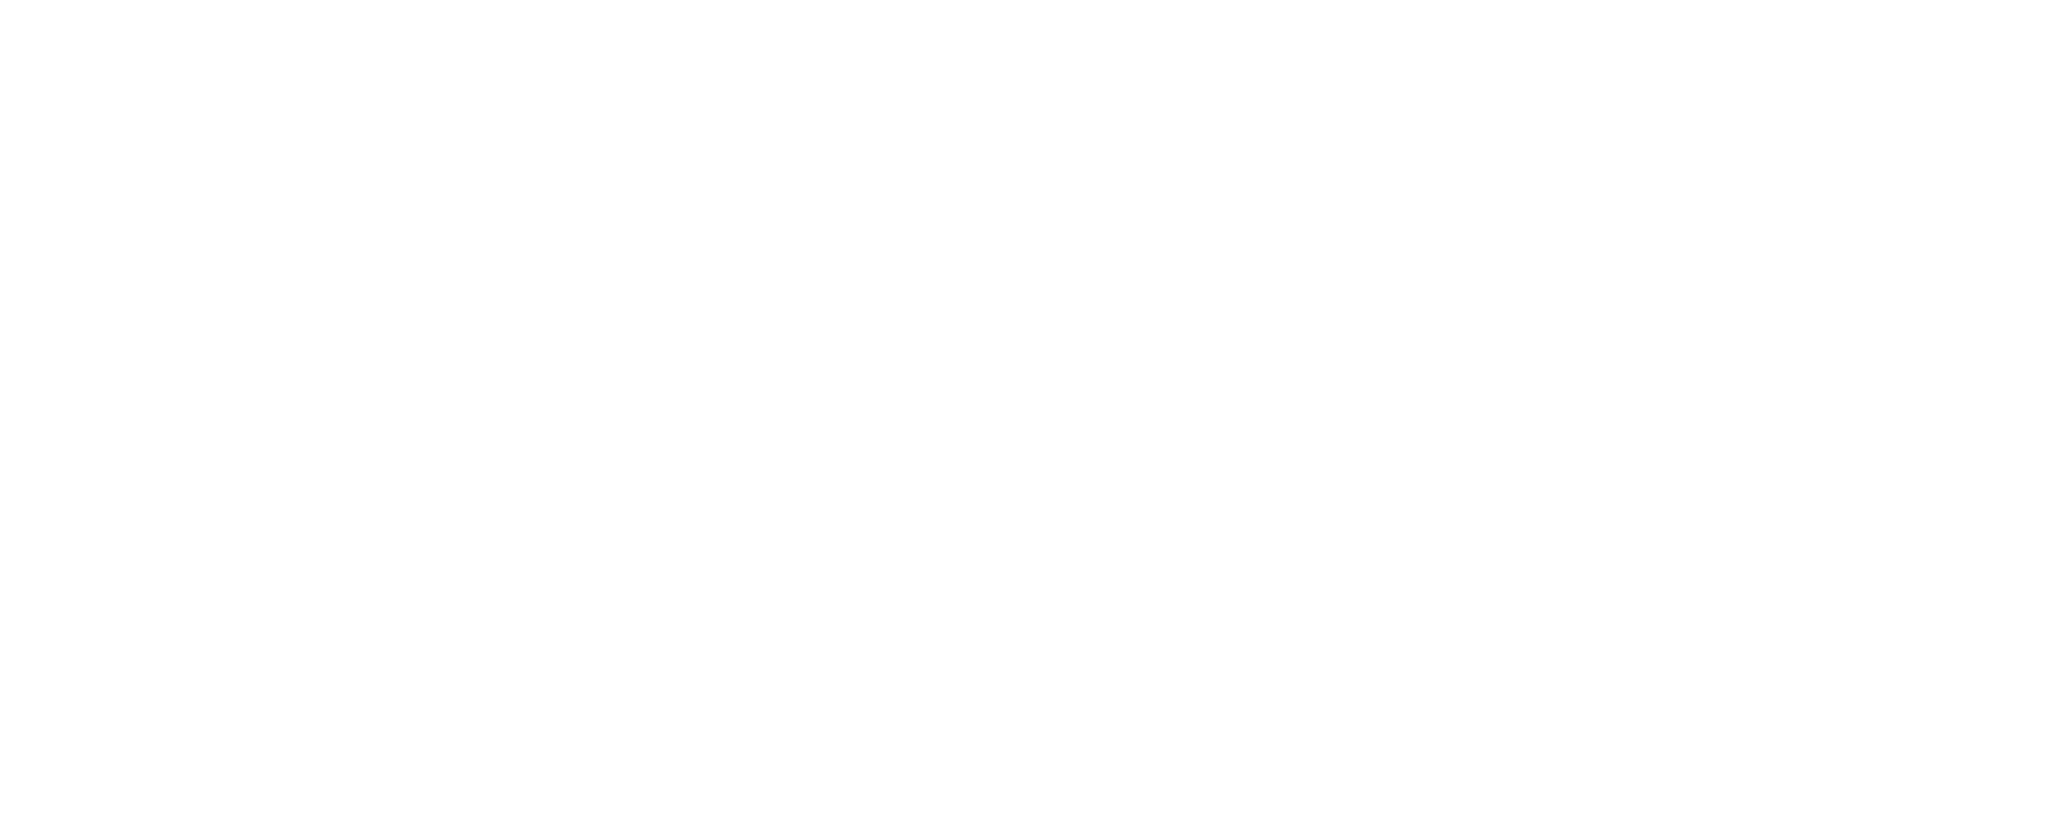 Logo of "ALL - ACCOR.LIVE LIMITLESS"